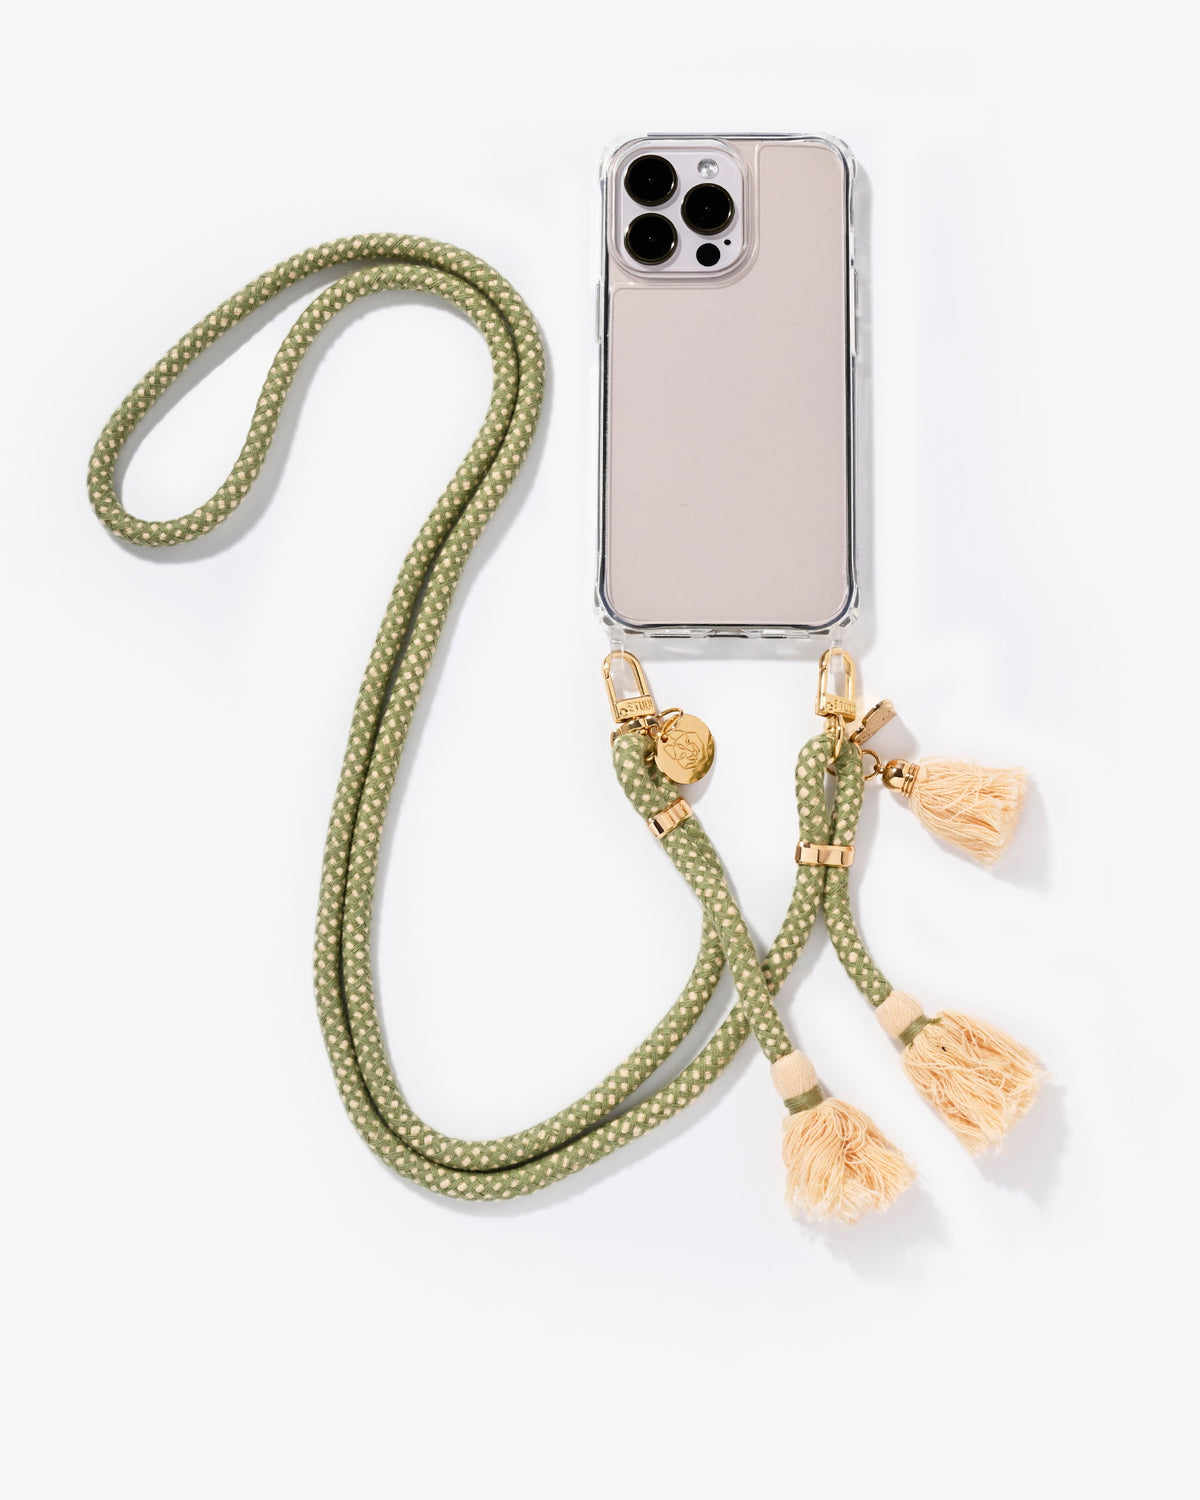 Basil cell phone strap + clear case